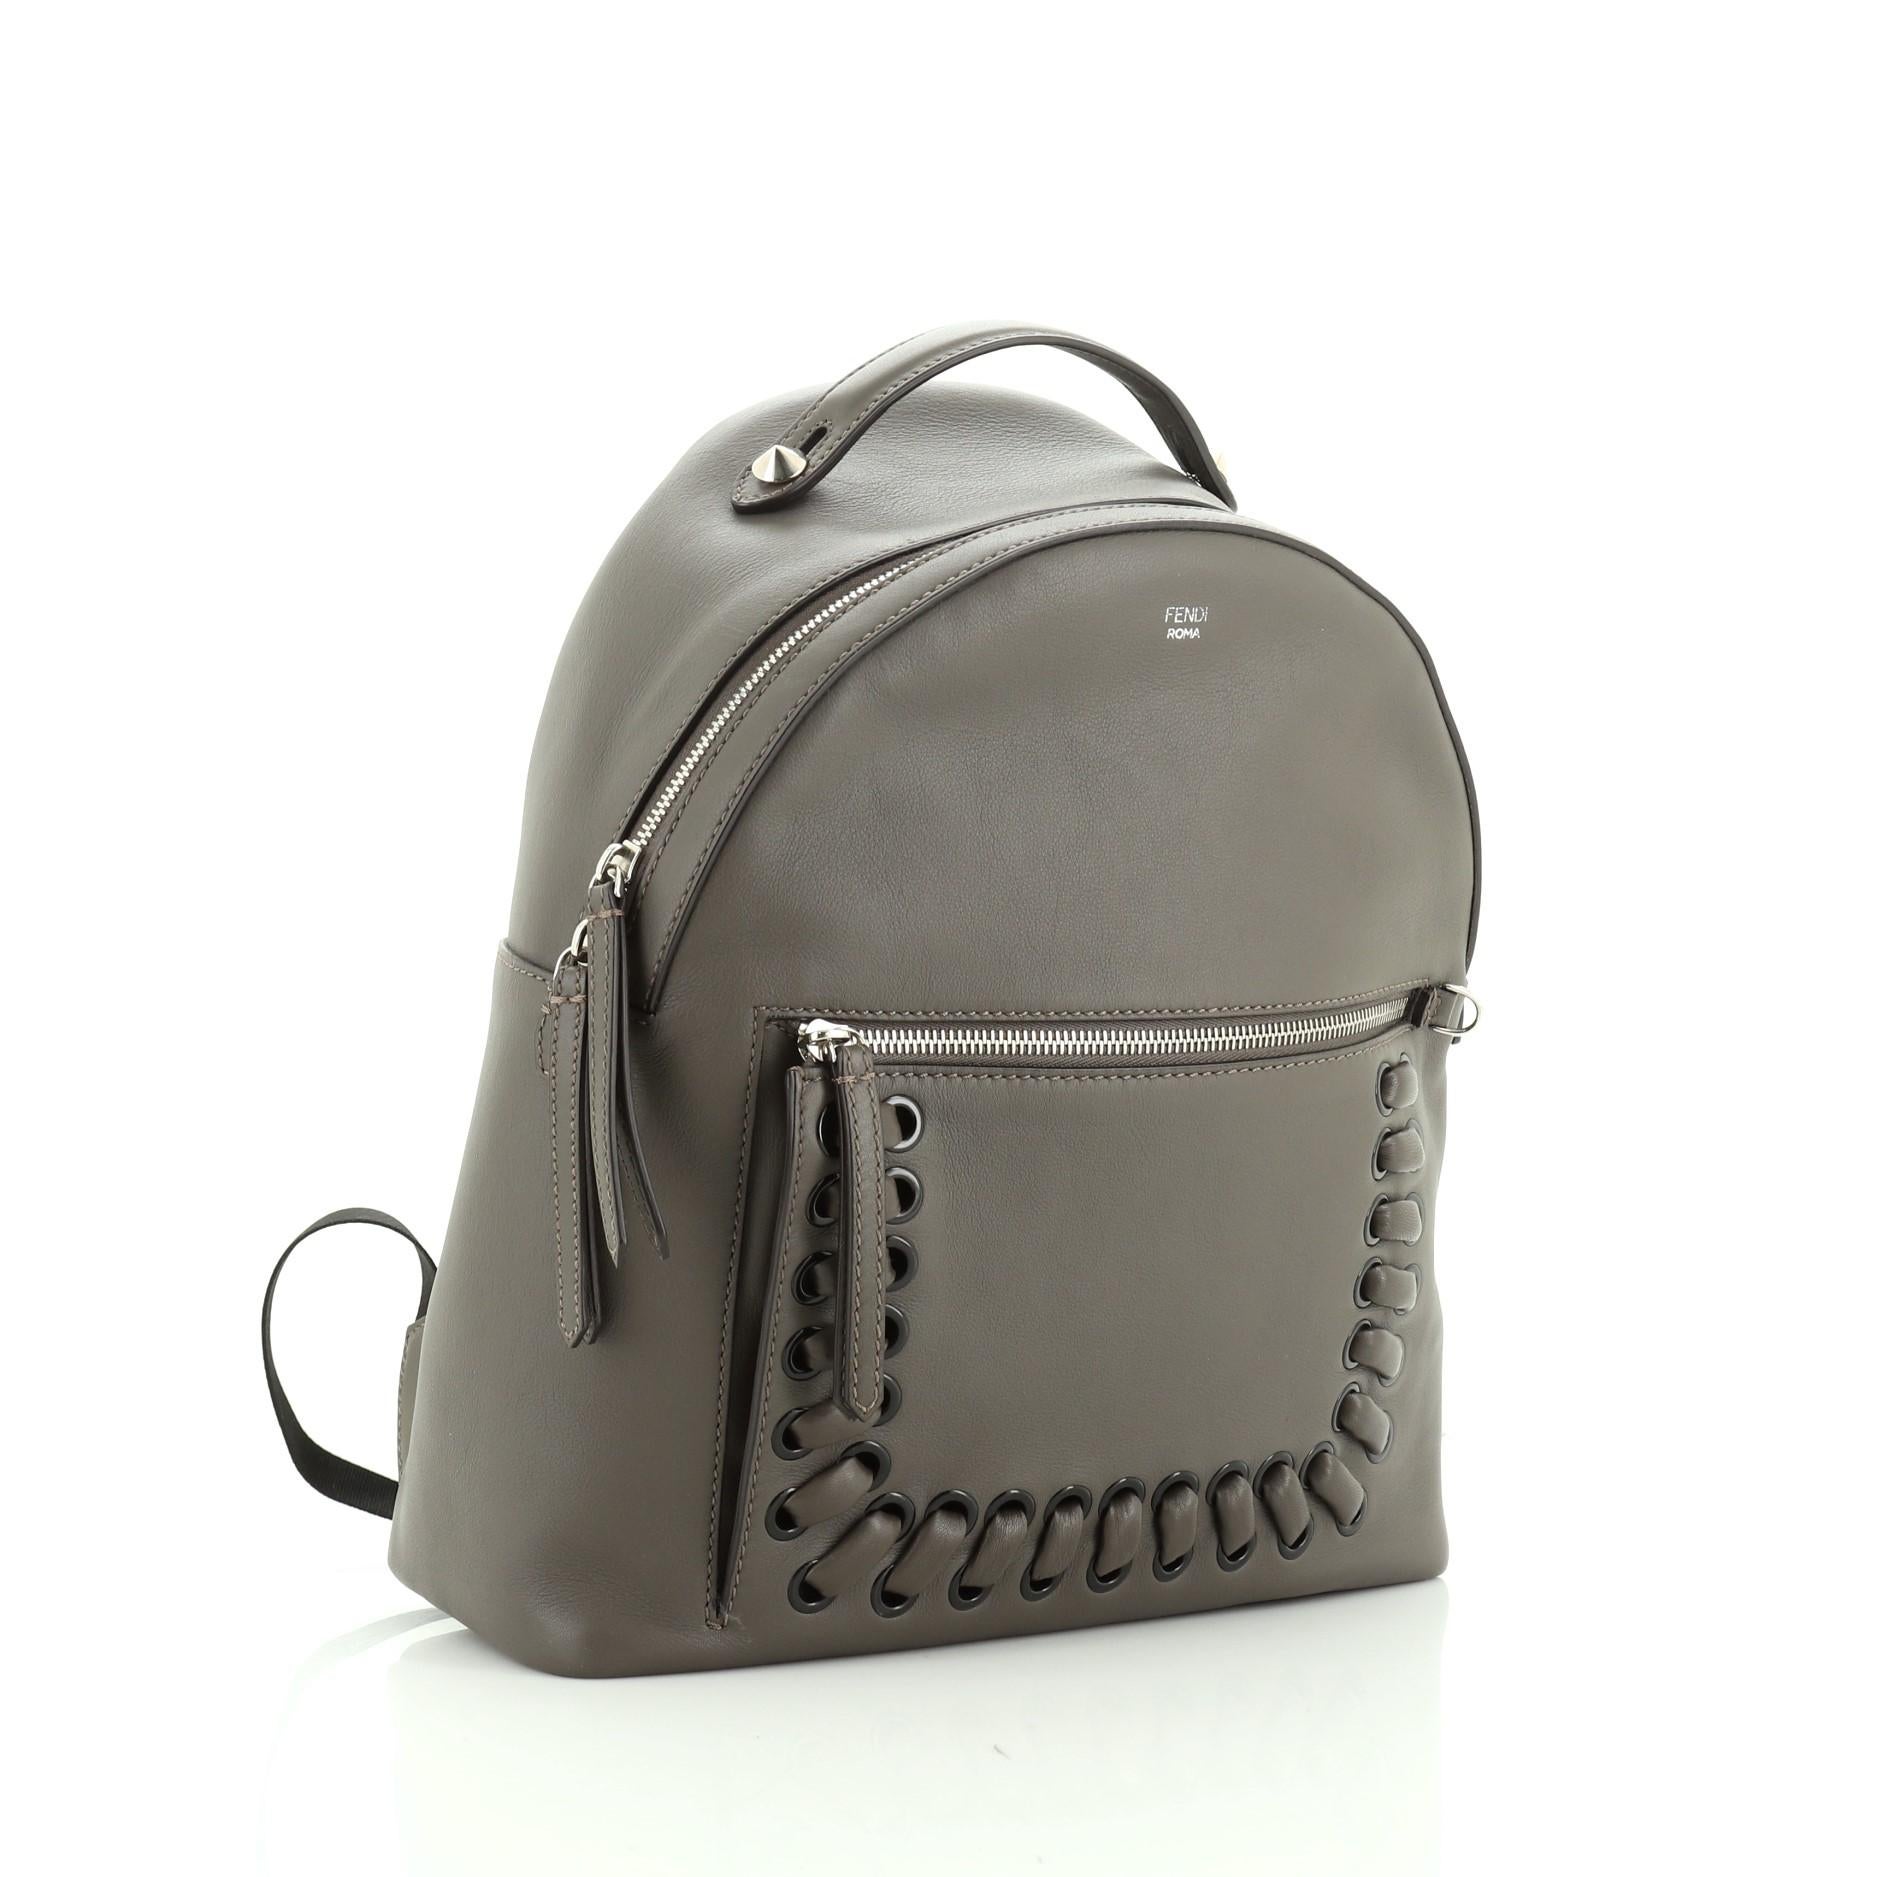 Gray Fendi By The Way Backpack Whipstitch Leather Medium